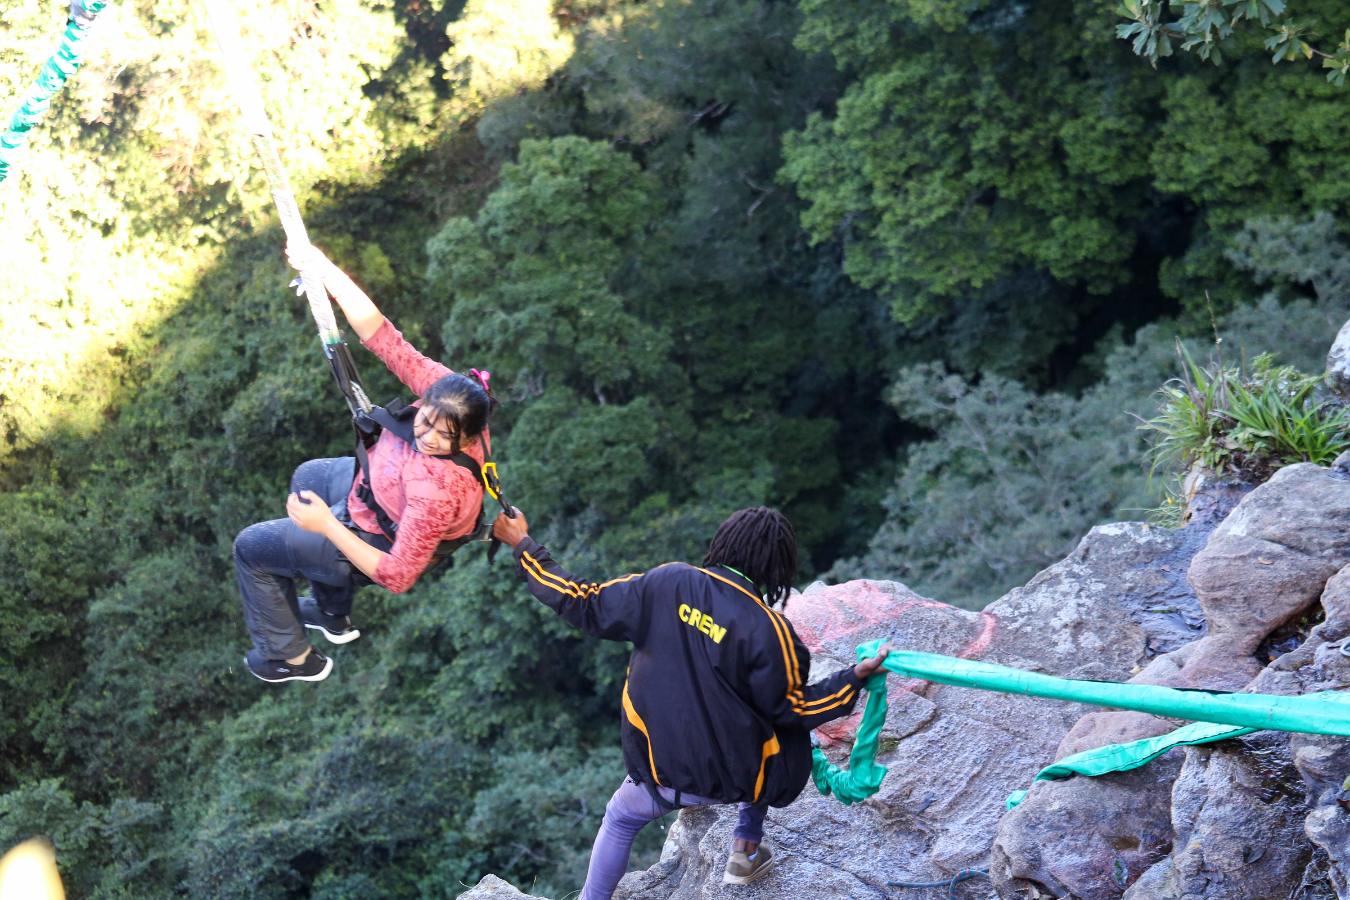 Wild Swing is the most thrilling activity at Oribi Gorge